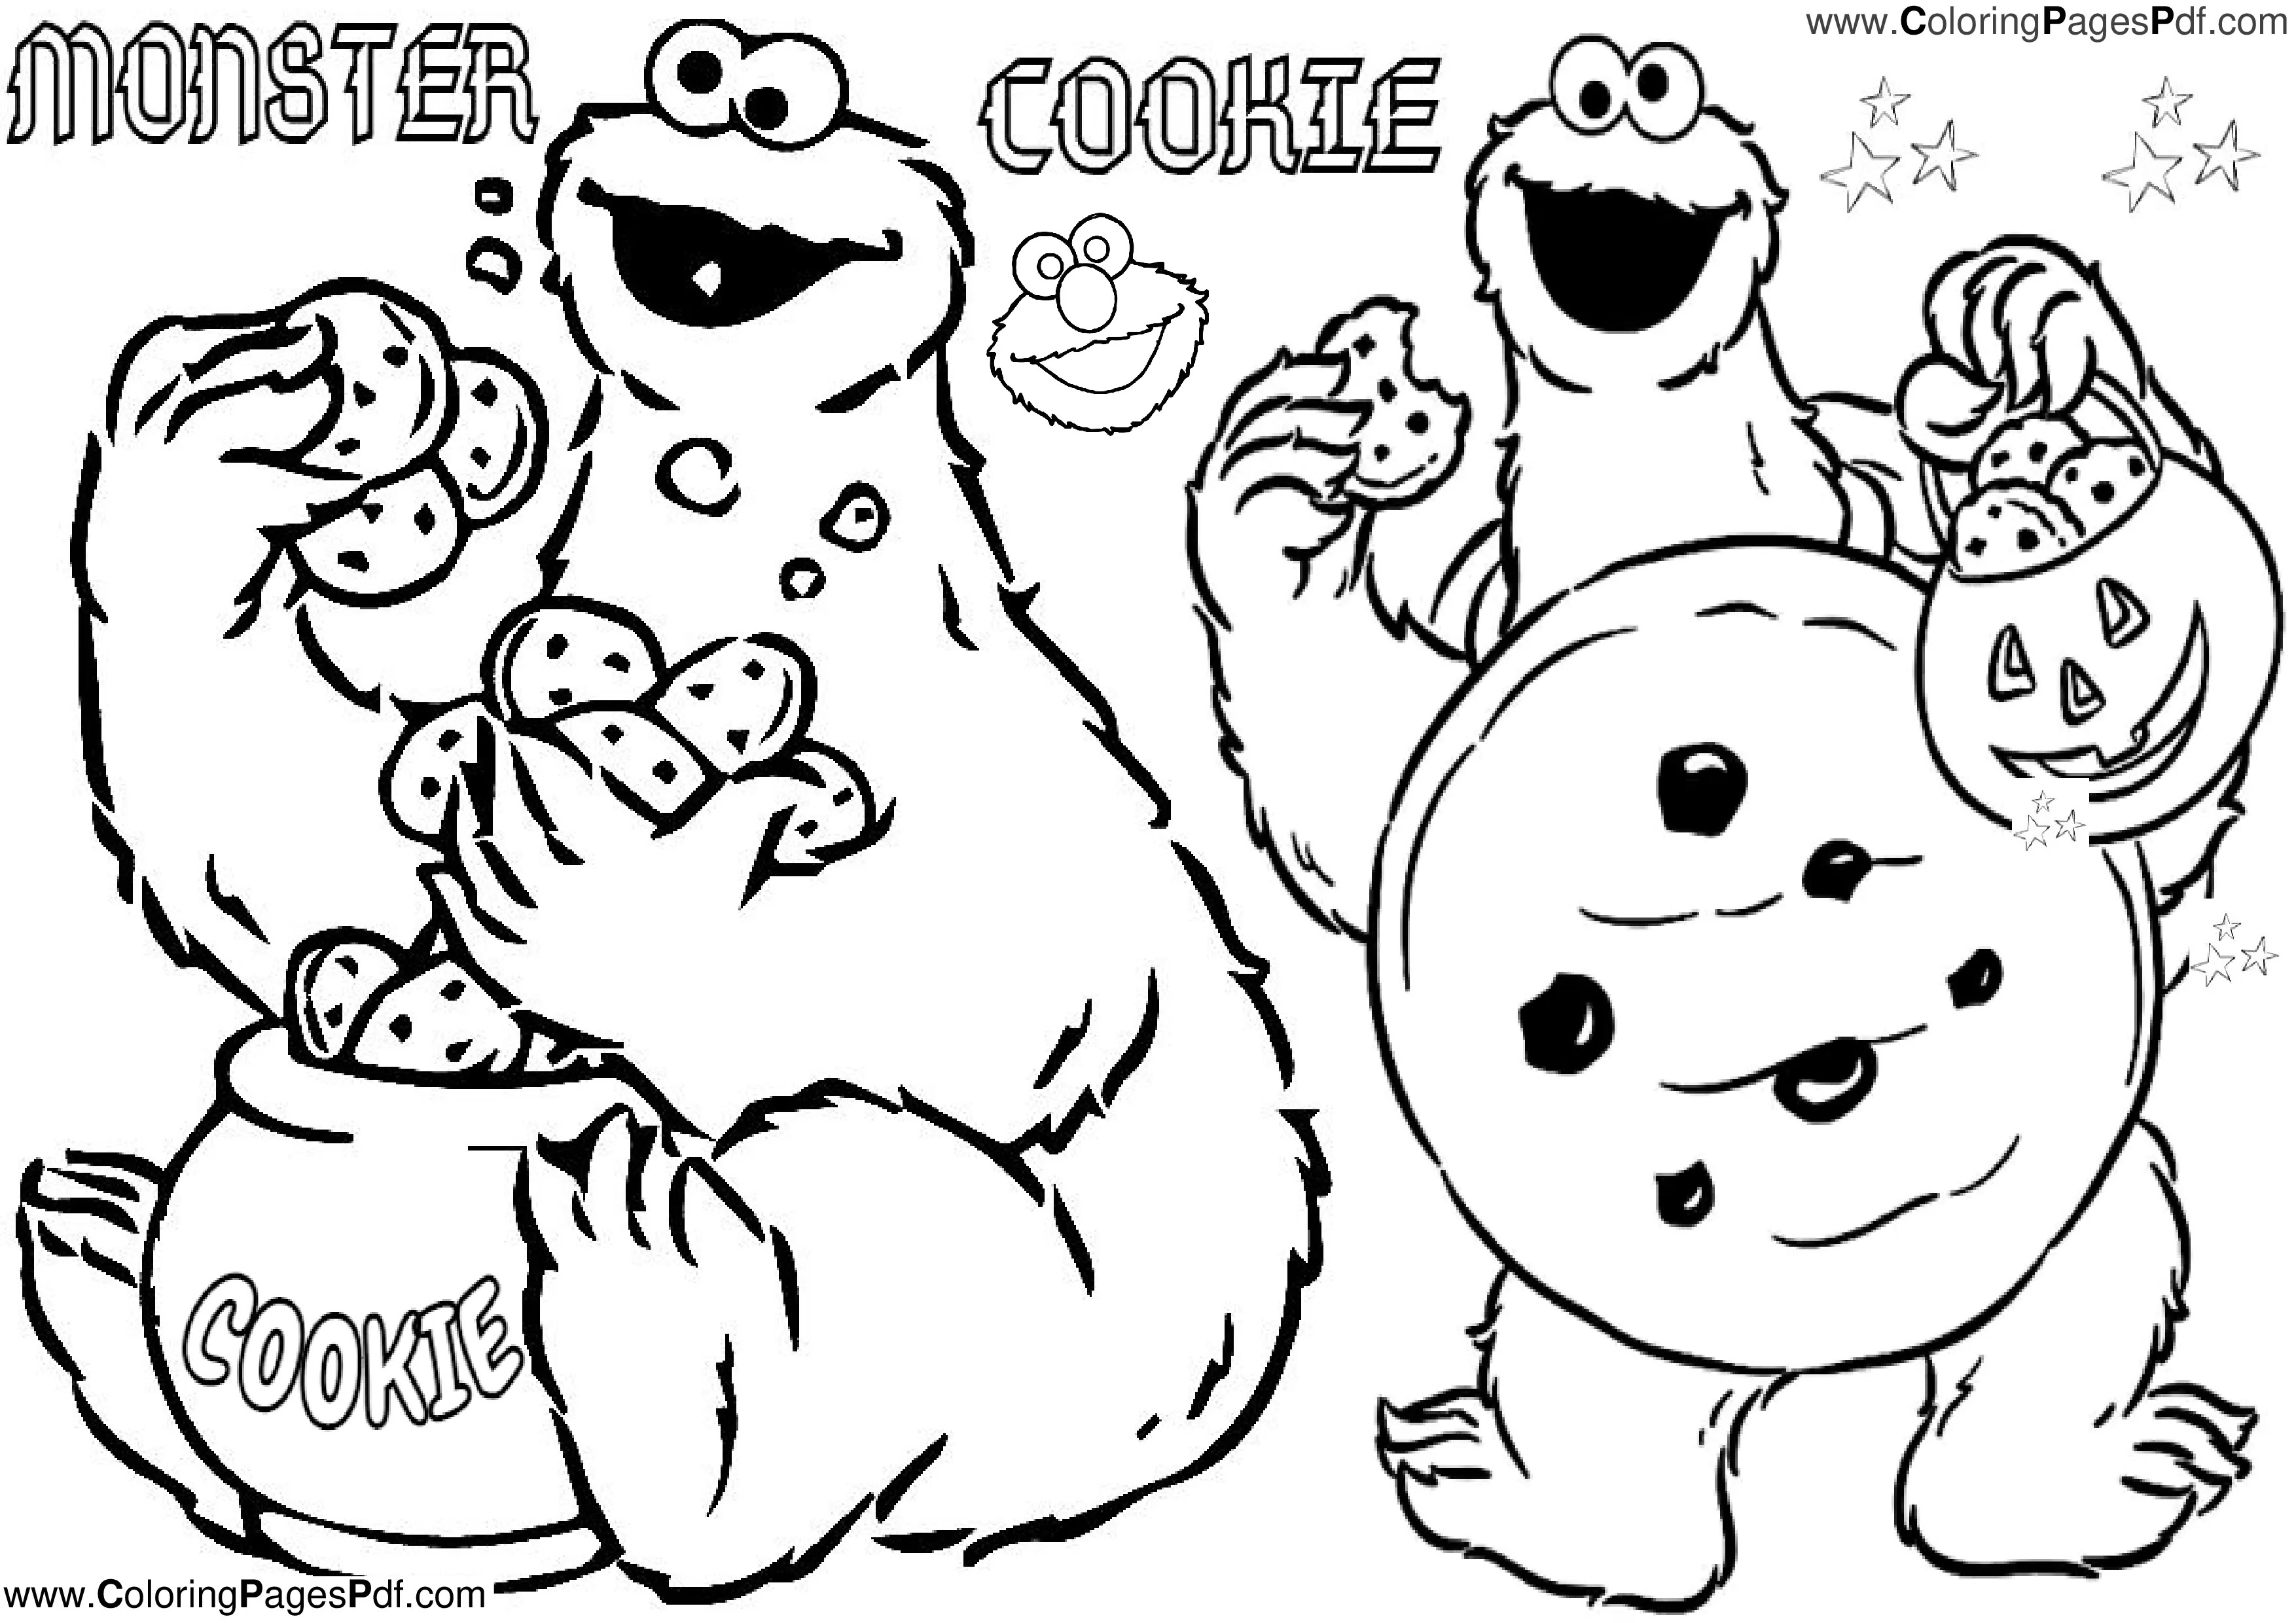 Cookie monster coloring page